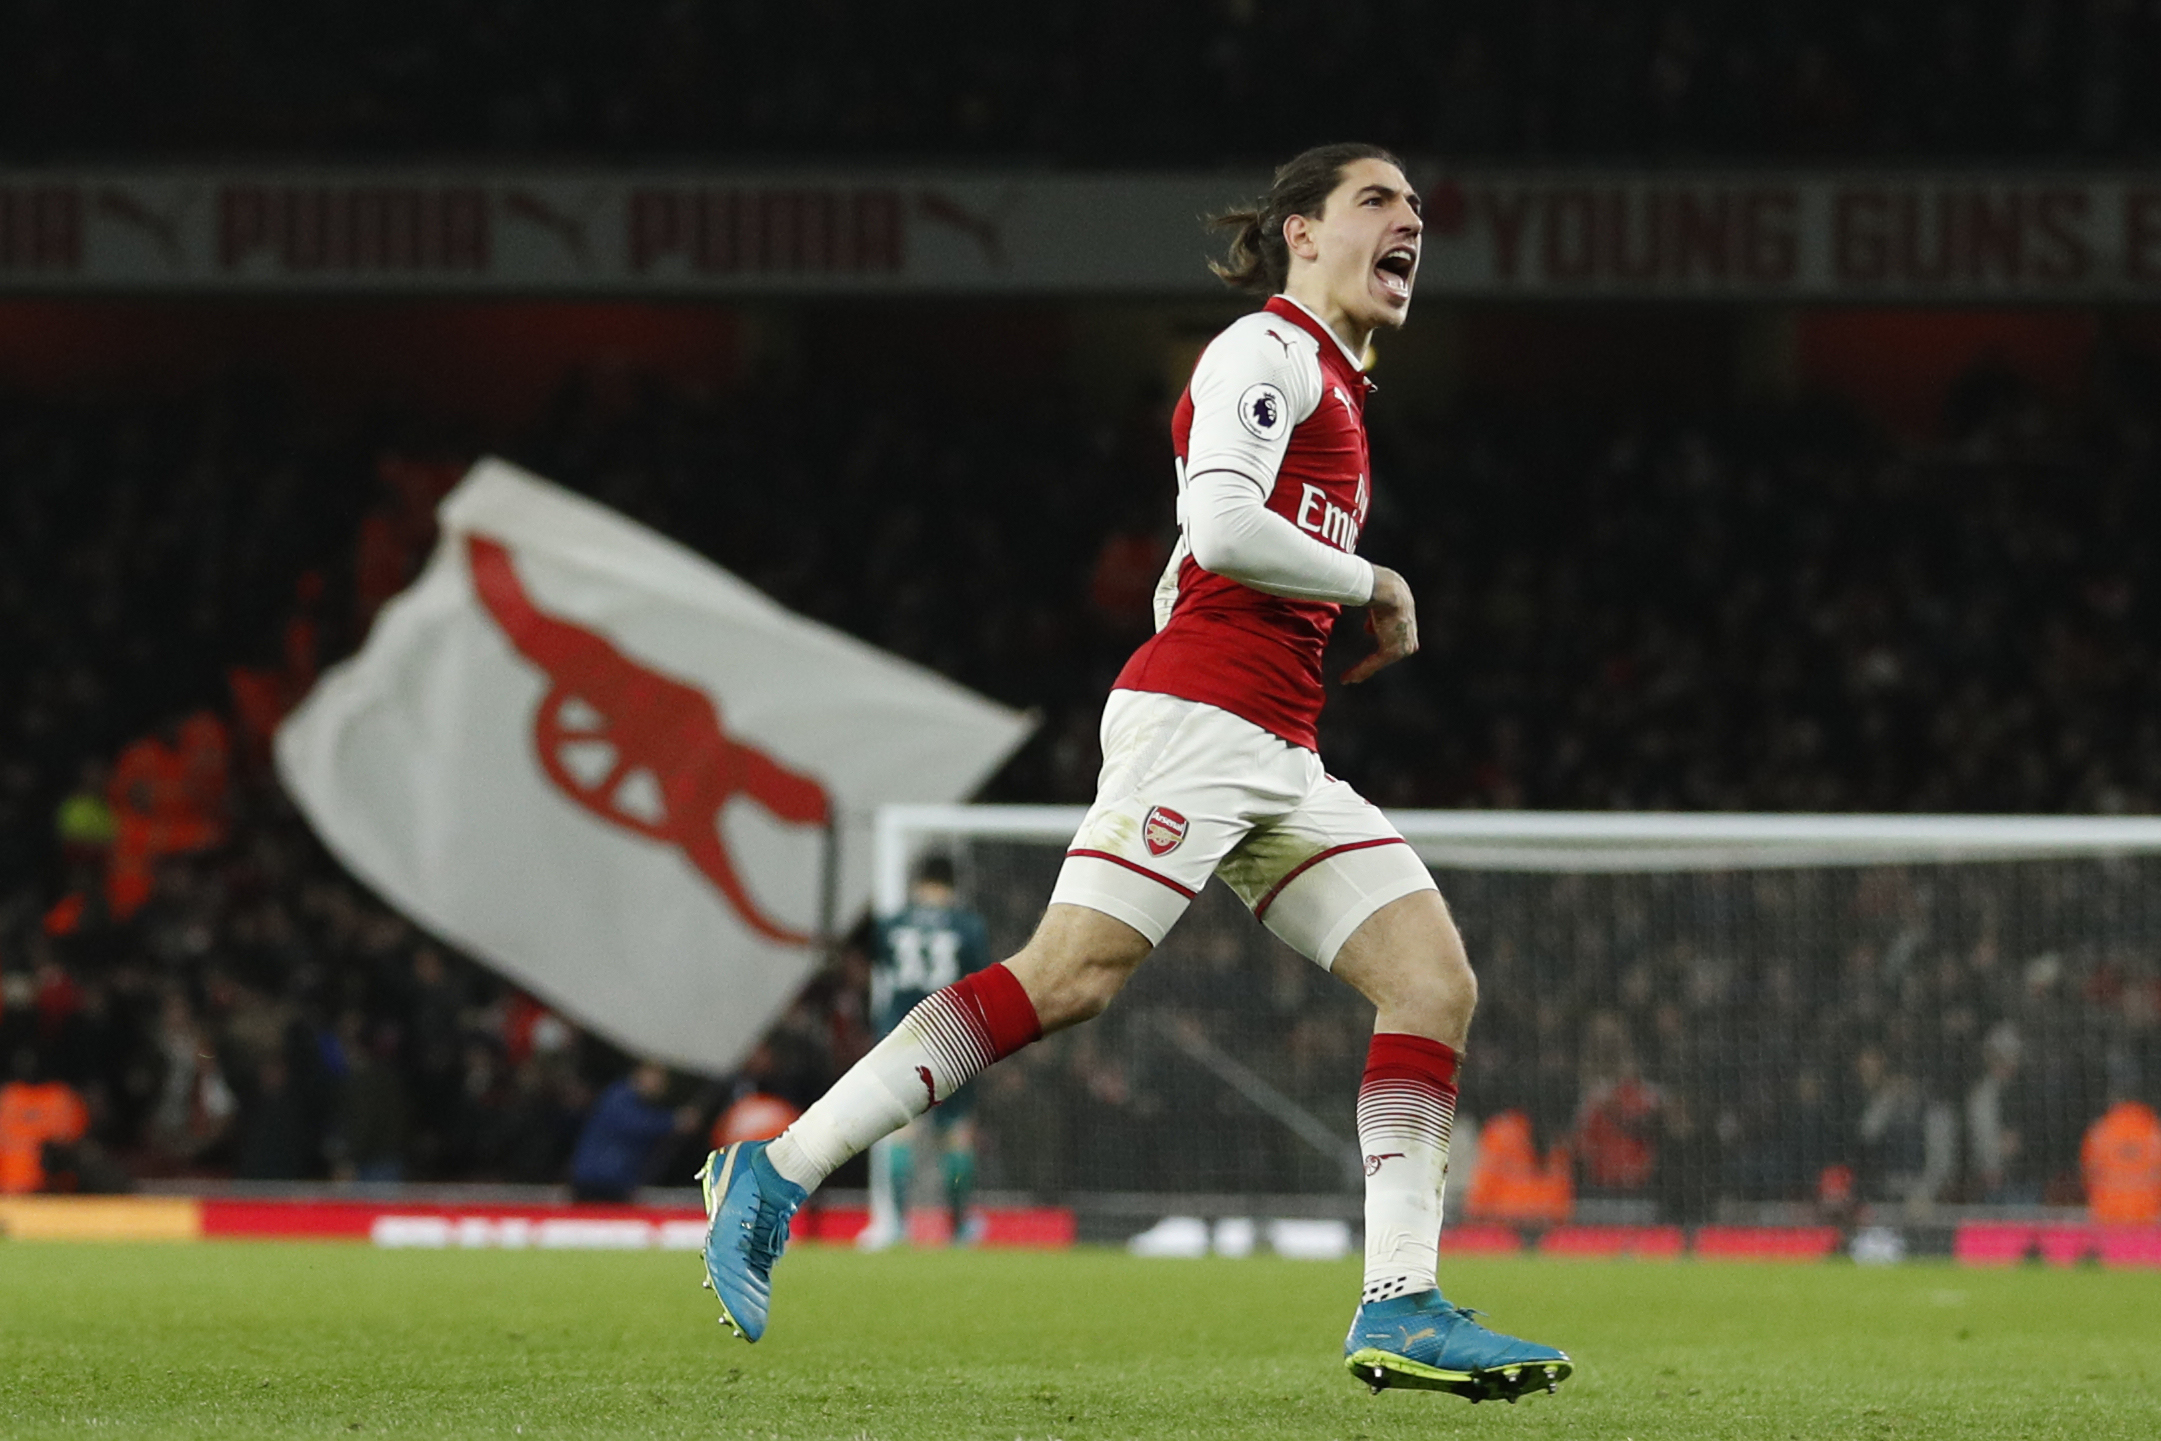 Arsenal's Spanish defender Hector Bellerin celebrates after scoring their second goal during the English Premier League football match between Arsenal and Chelsea at the Emirates Stadium in London on January 3, 2018.  / AFP PHOTO / Adrian DENNIS / RESTRICTED TO EDITORIAL USE. No use with unauthorized audio, video, data, fixture lists, club/league logos or 'live' services. Online in-match use limited to 75 images, no video emulation. No use in betting, games or single club/league/player publications.  /         (Photo credit should read ADRIAN DENNIS/AFP/Getty Images)